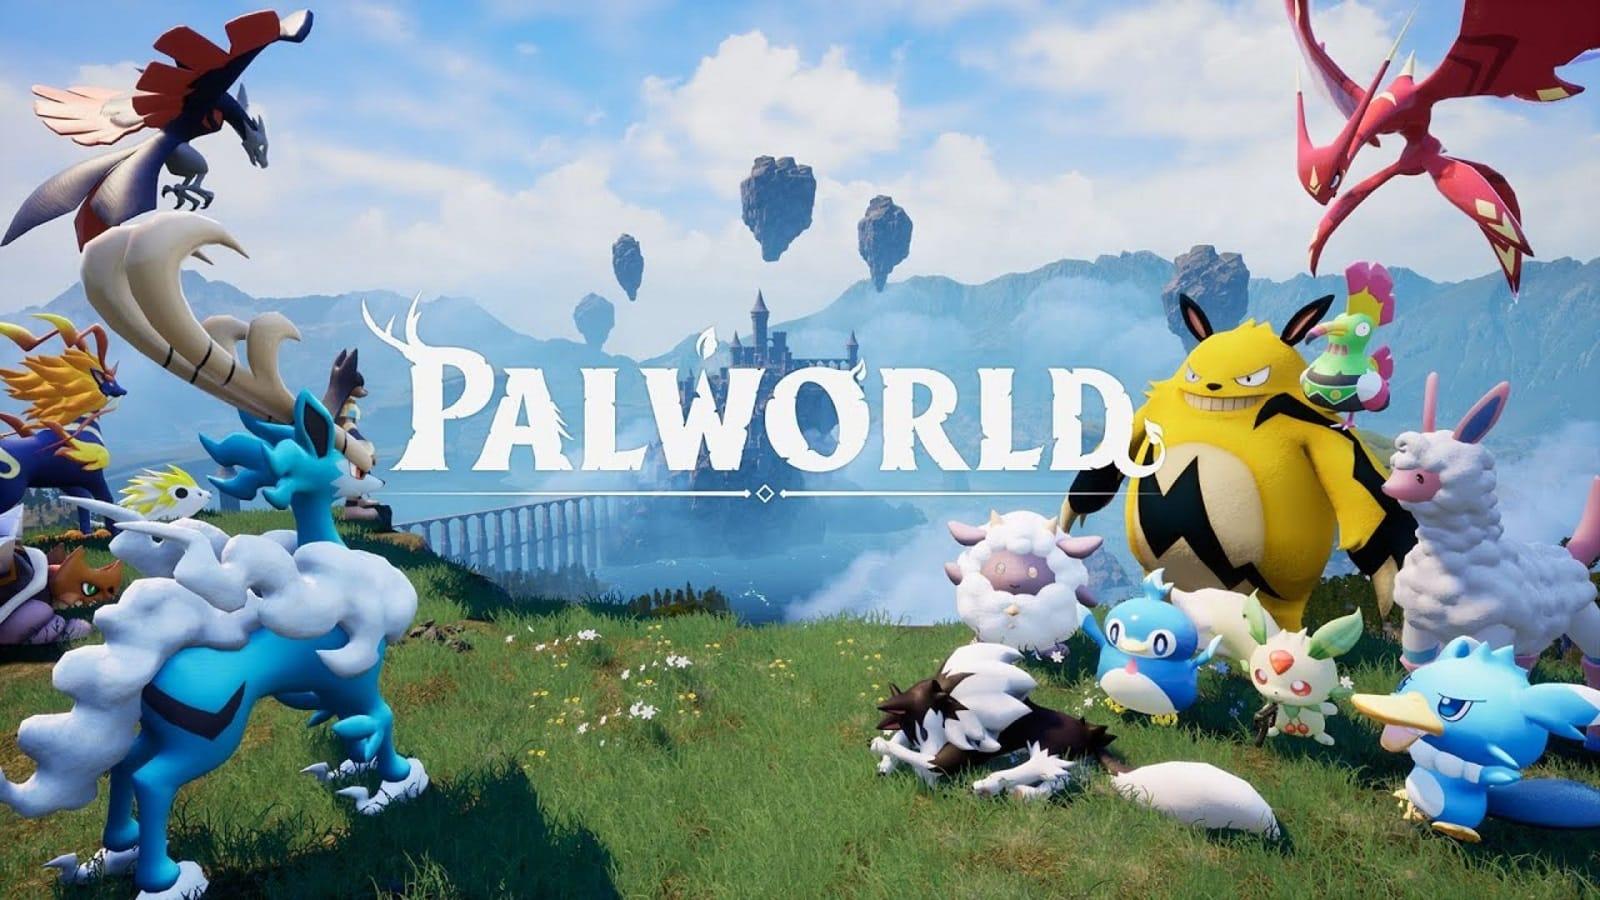 Palworld monsters